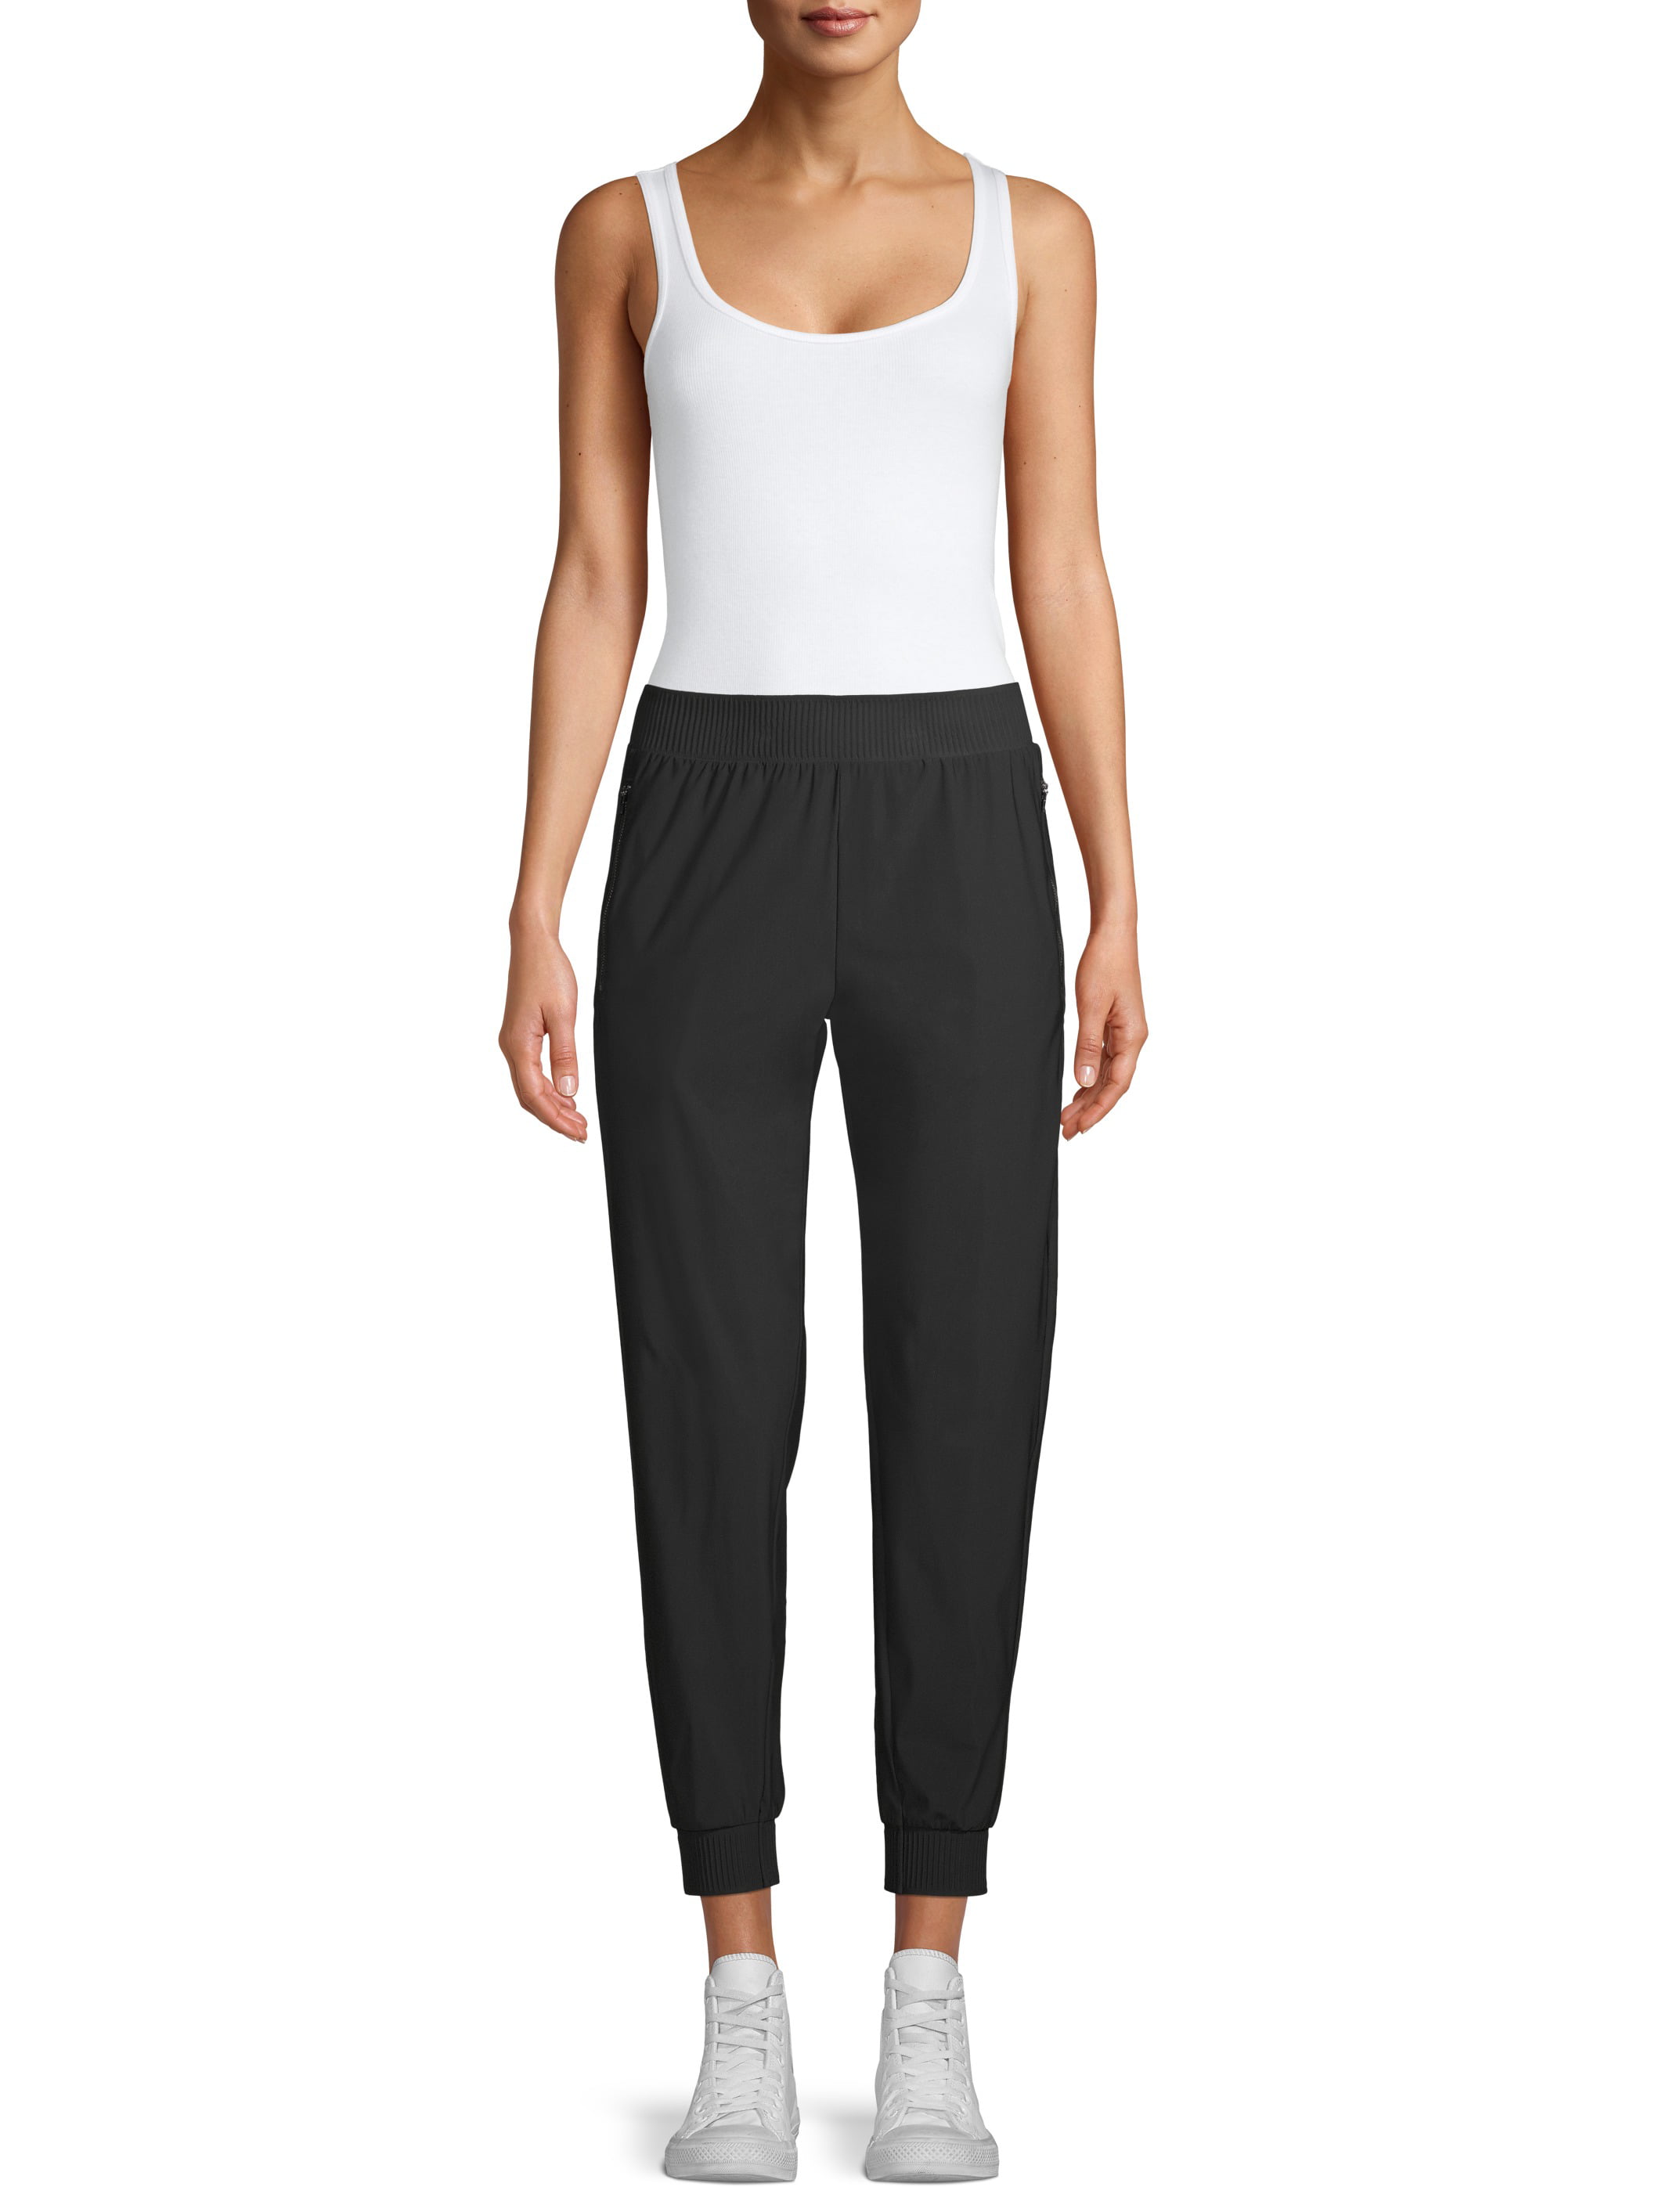 Athletic Works Women's Athleisure Commuter Jogger Pants with Zip